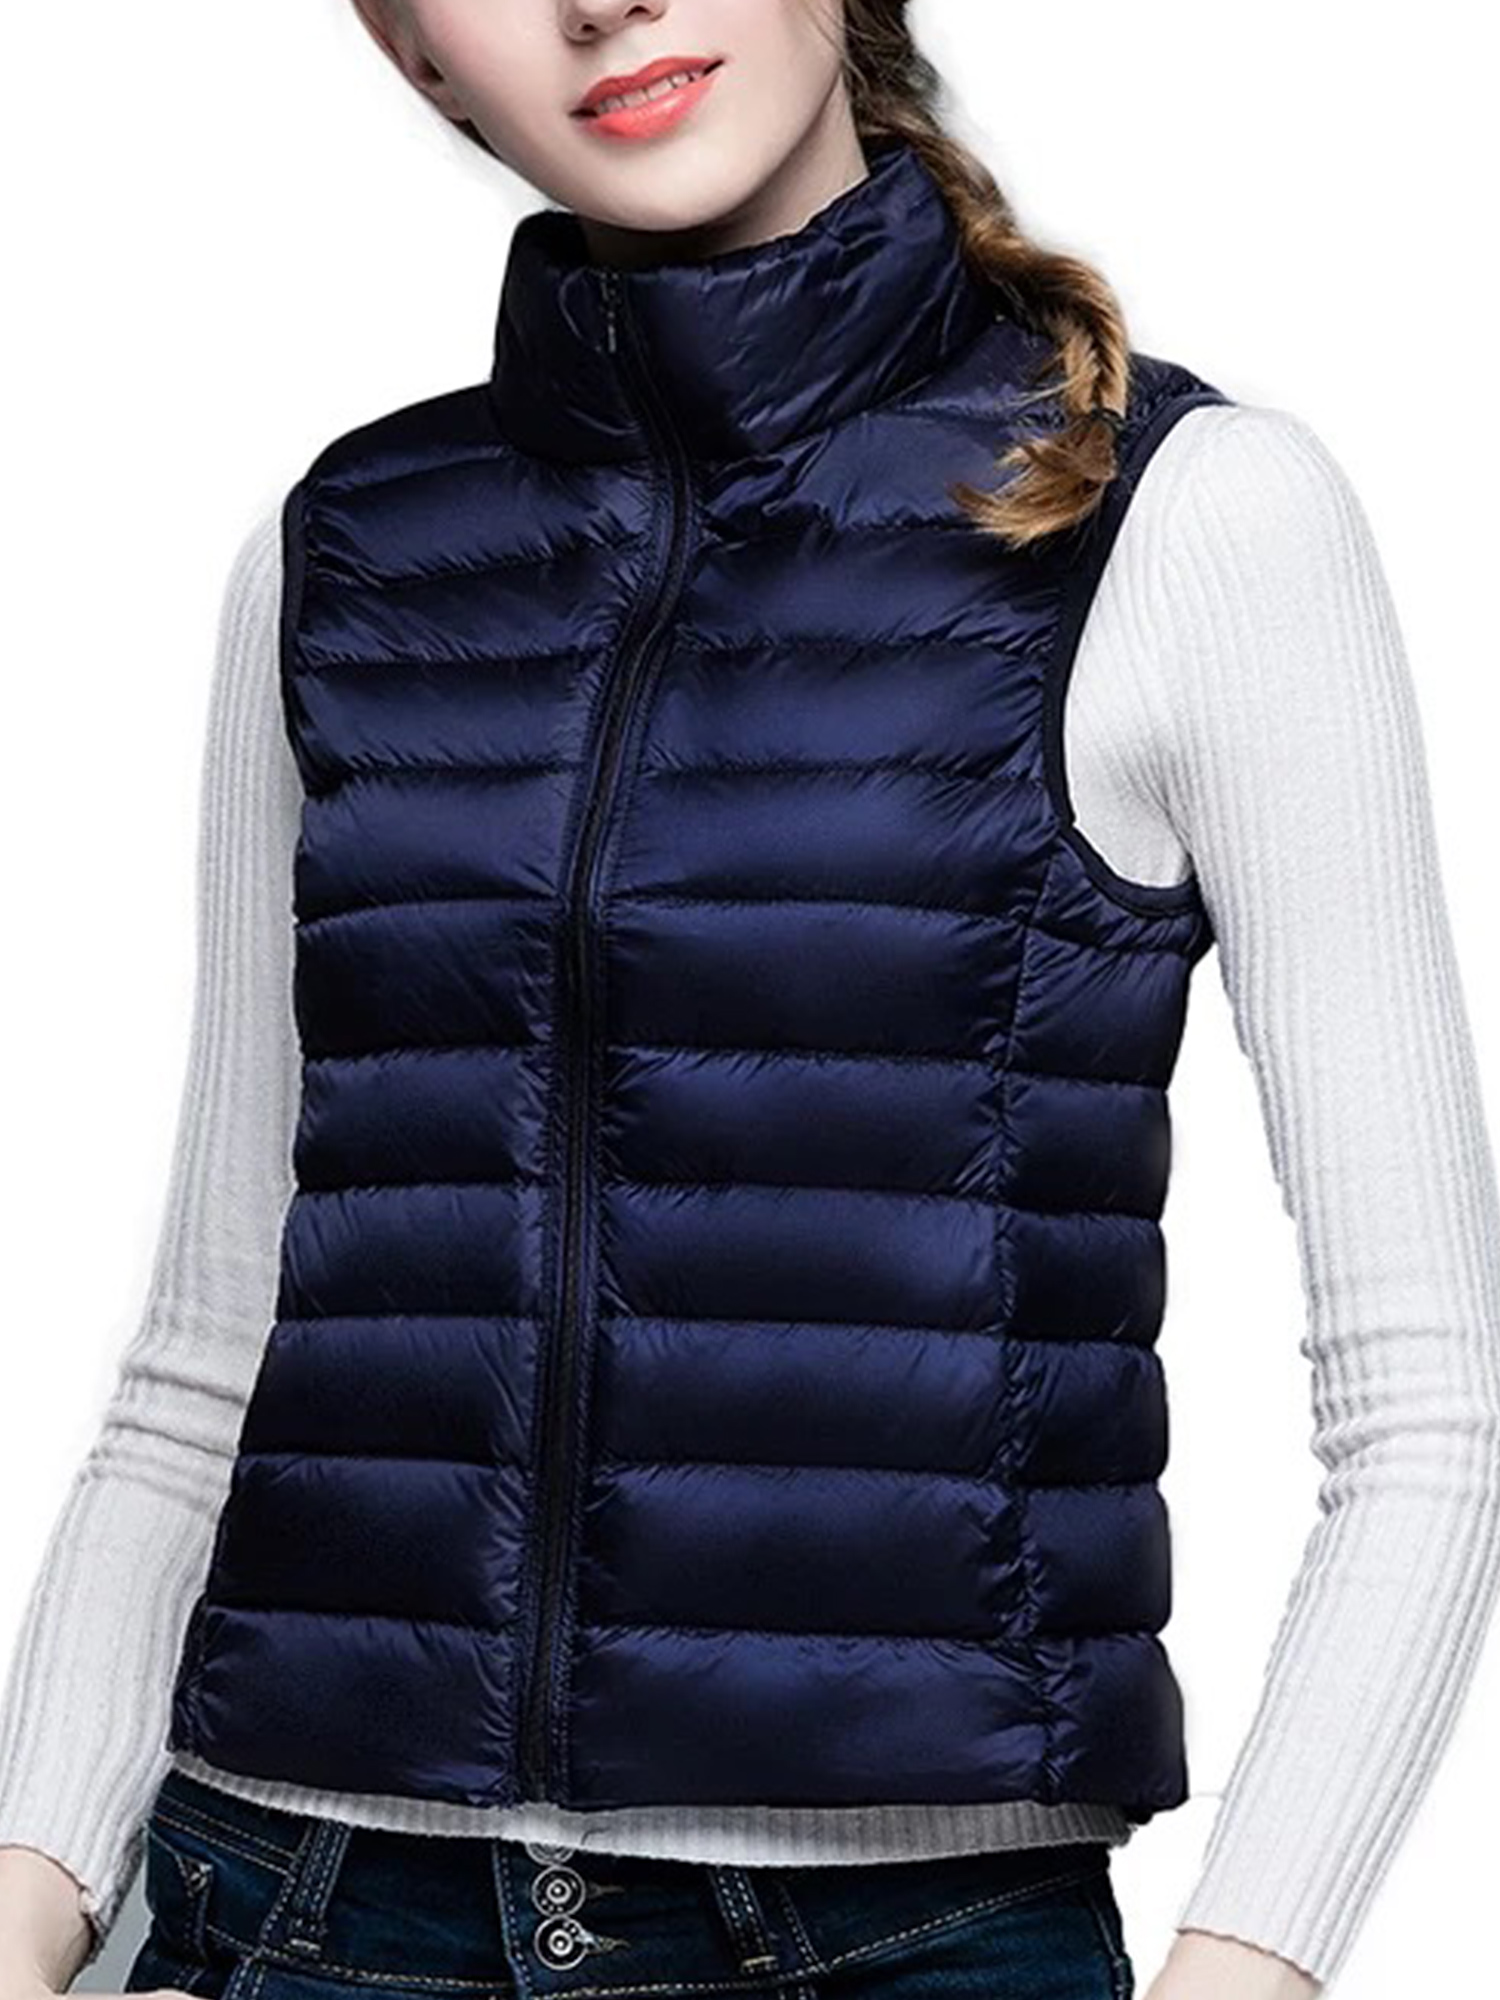 Plus Size Women Casual Stand-up Collar Zip Up Gilet Quilted Padded Vest Sleeveless Lightweight Packable Down Vest Jacket Ladies Fashion Winter Warm Puffer Outwear Vest - image 1 of 2